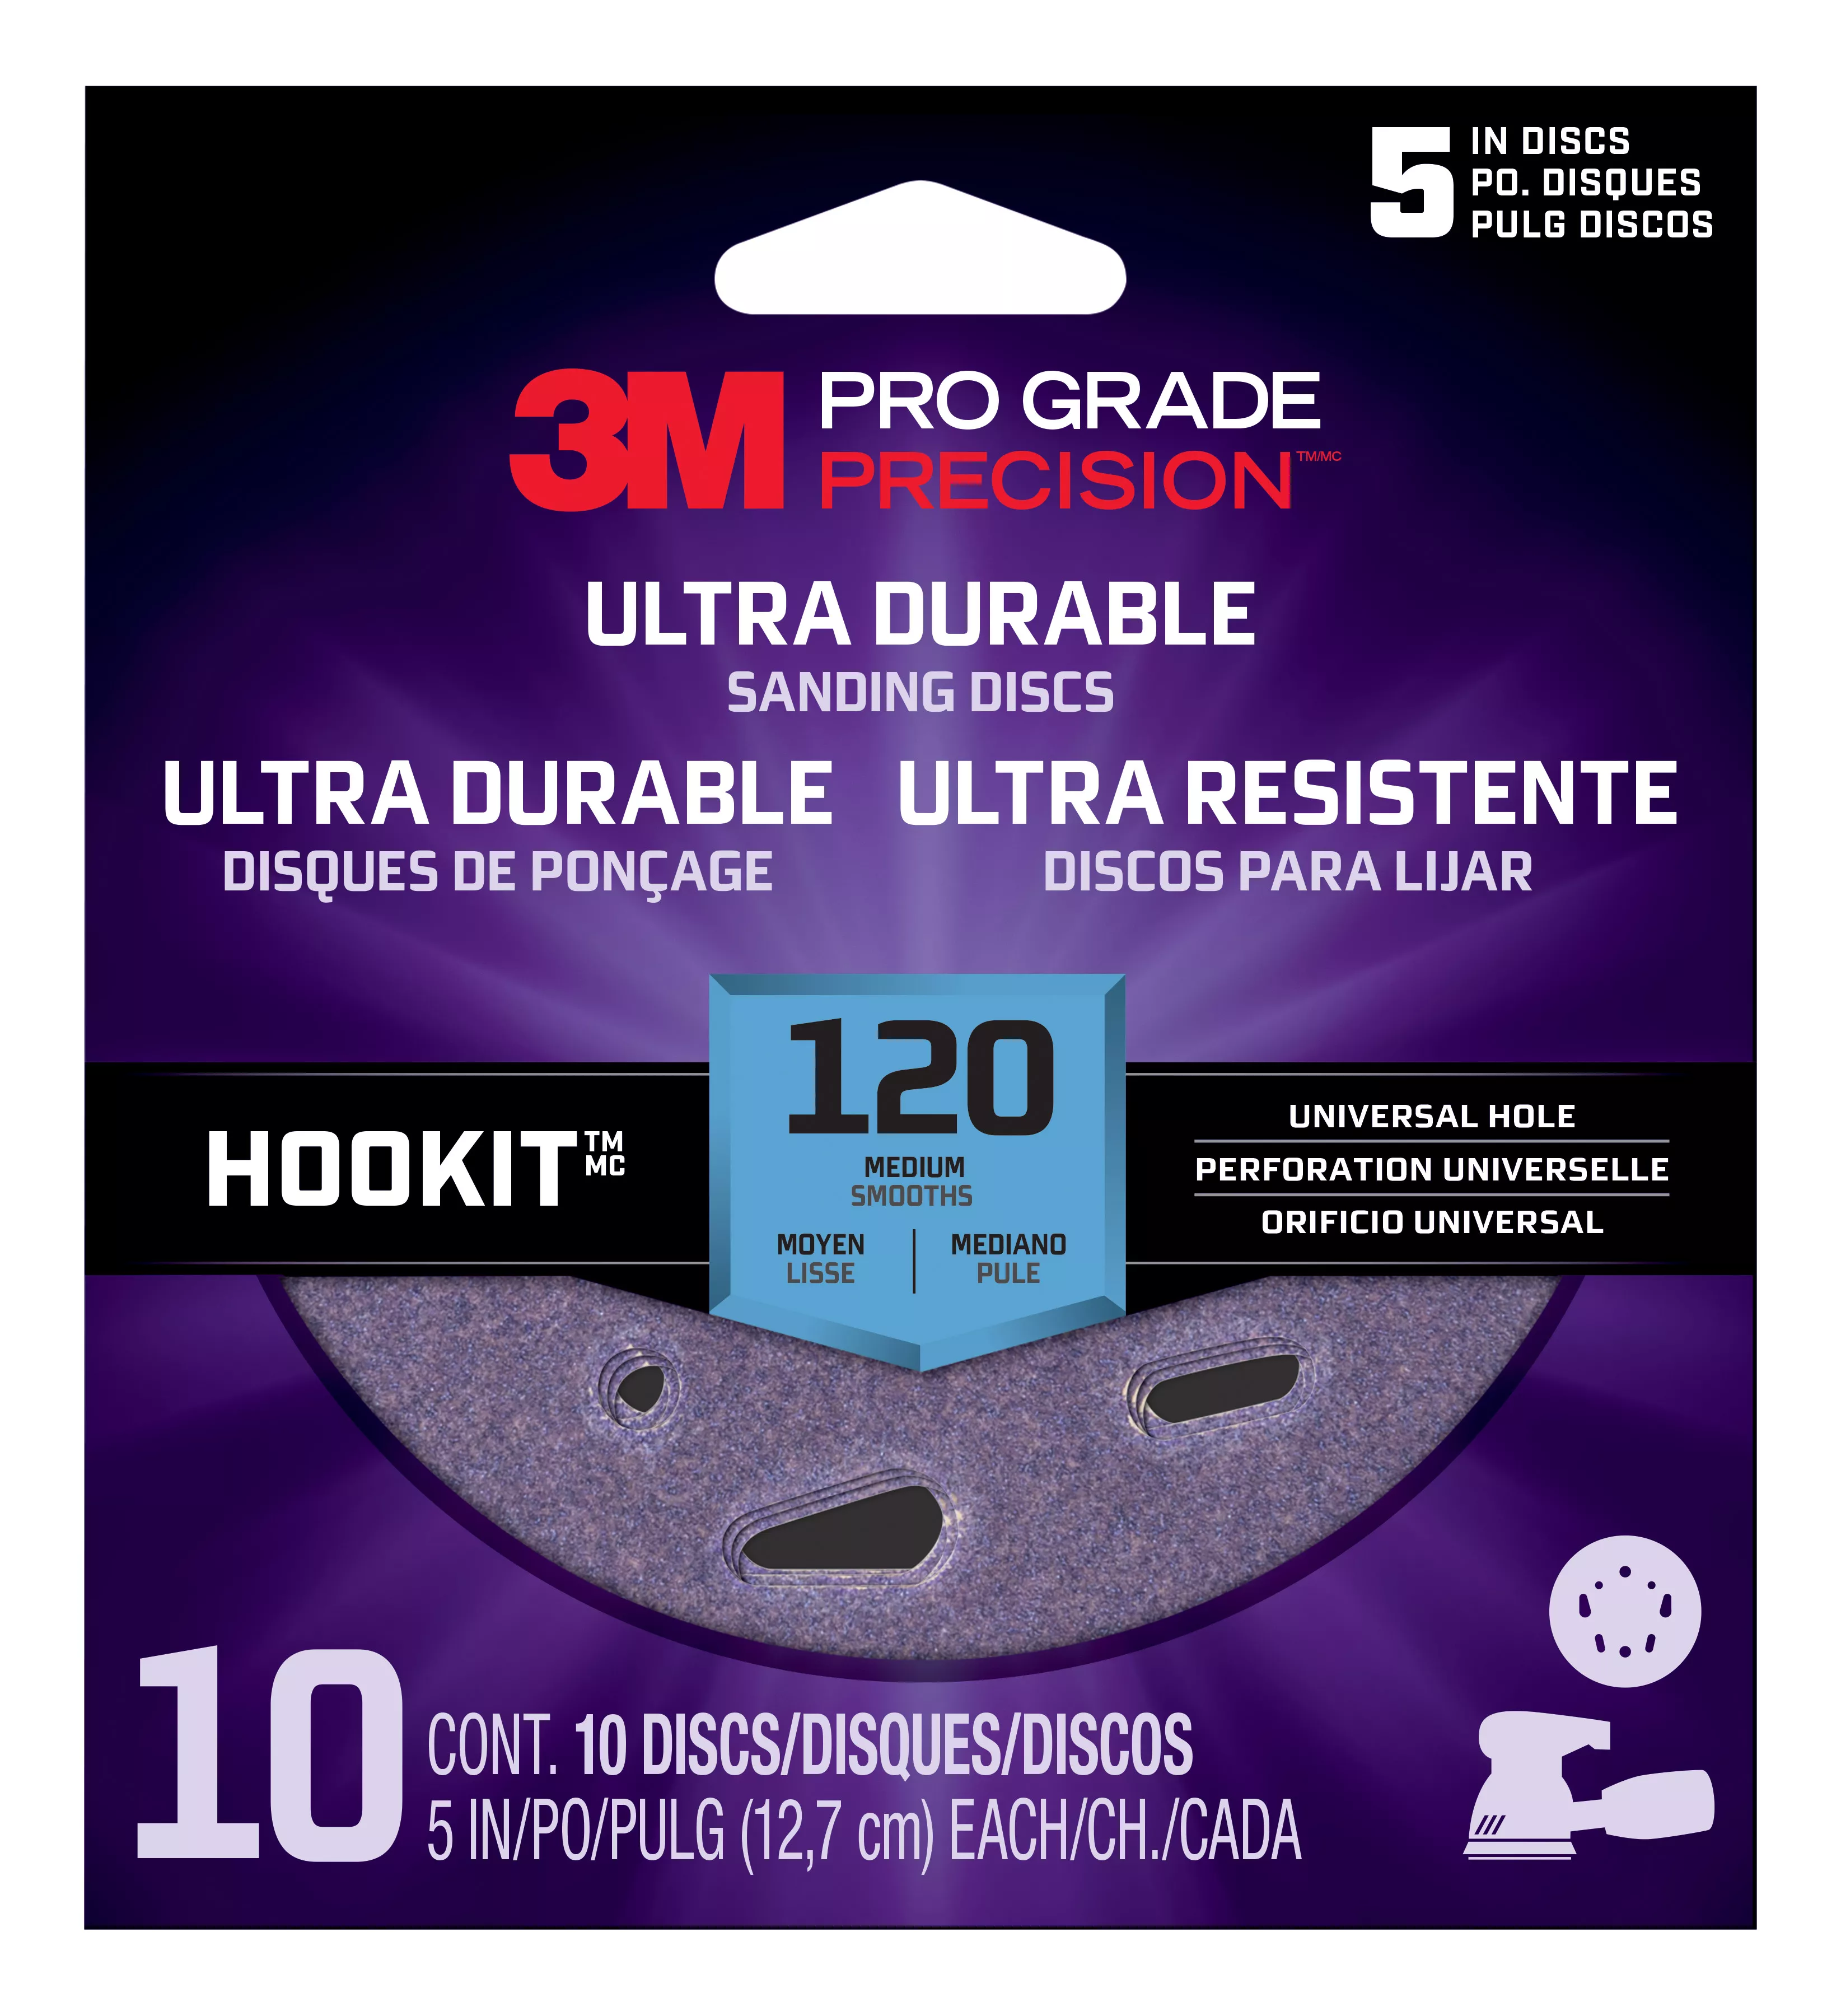 3M™ Pro Grade Precision™ Ultra Durable Universal Hole Sanding Disc
DUH5120TRI-10I, 5 inch UH, 120, 10/packDisc